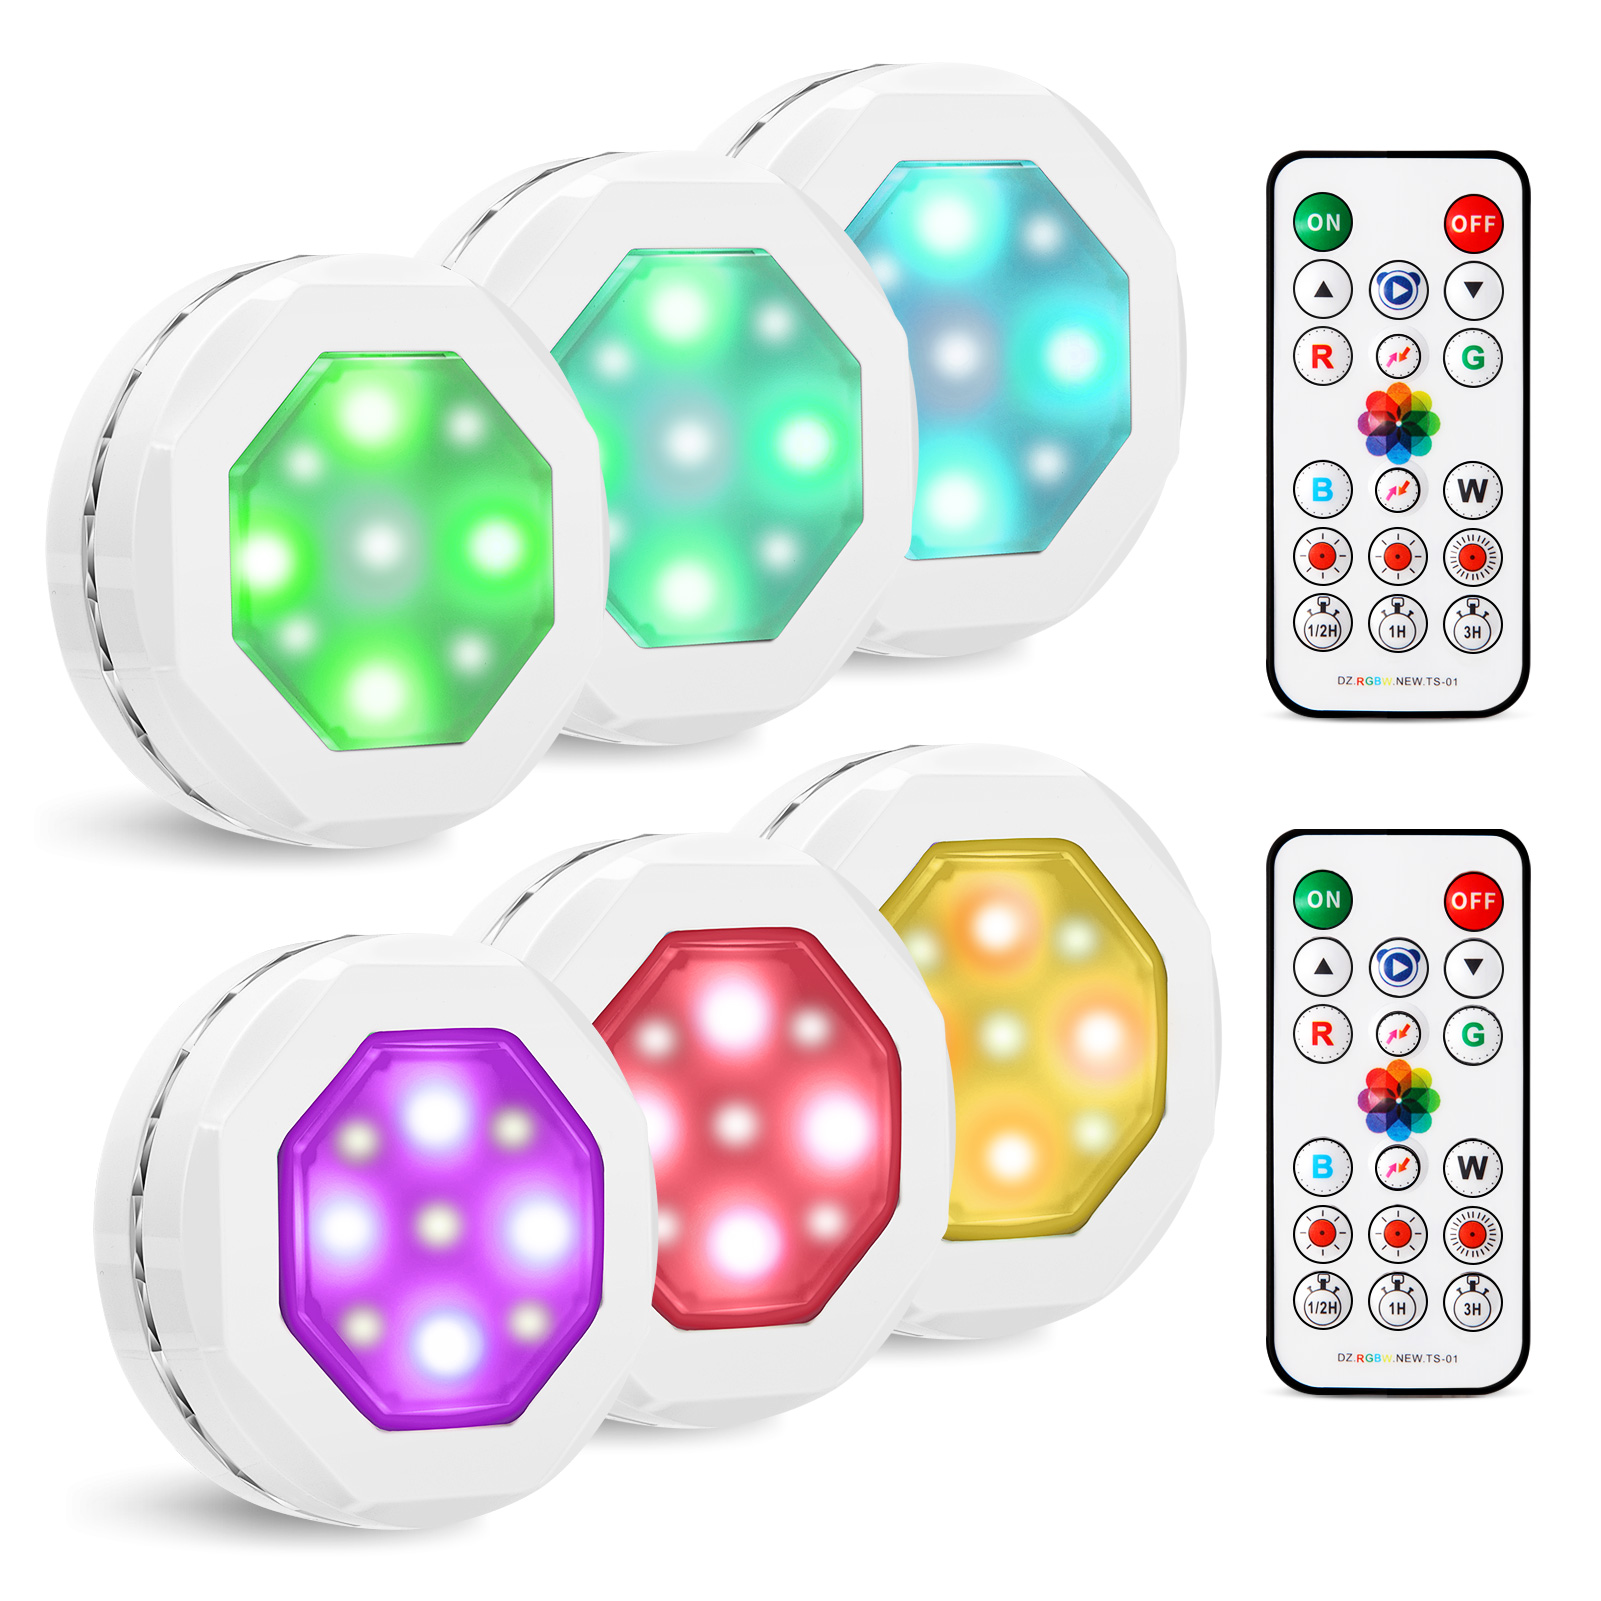 Simzone LED Light RGB Color Changing Lights Dimmable,Remote Control LED  Lights with Timer for Kitchen Wardrobe Home Holiday Decorations, 6 Pack